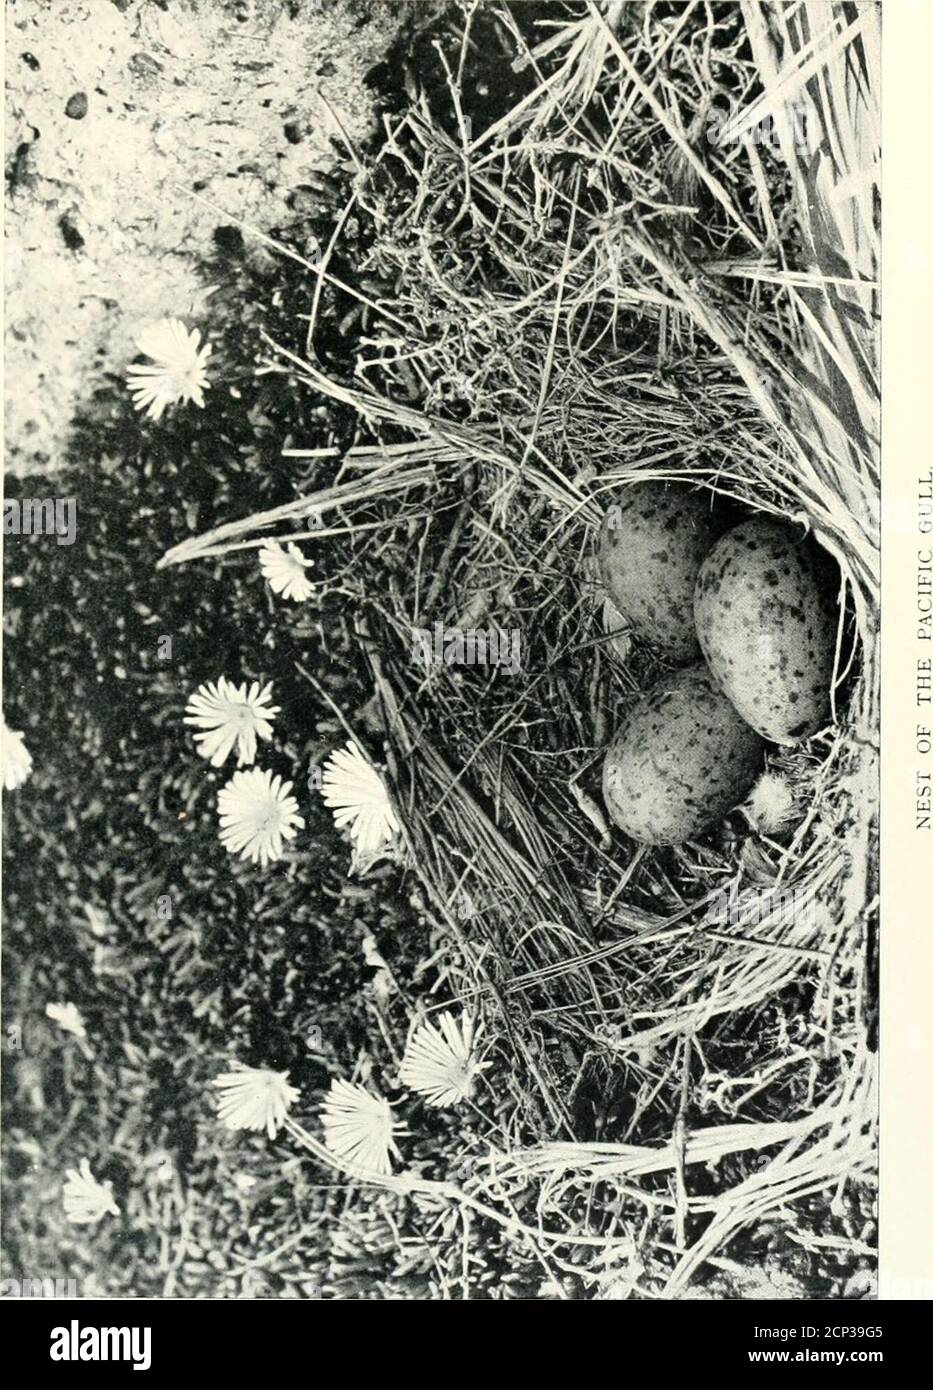 . Nests and eggs of Australian birds, including the geographical distribution of the species and popular observations thereon . t olive-brown, moderately l)ut boldlyblotched with rich umber and dull grey. Dimensions in inches ofl)roper clutches: A (1) 3-08 x 2-09, (2) 3-05 x 2-03, (3) 2-96 x 2-0 ;B (1) 2-98 X 2-03, (2) 2-97 x 2-0, (3) 2-95 x 2-01. (Plate 25.) Ohservations.—This groat Gull frequents the sea shores of Australia(except, perhaps, the northern coast) and Tasmania. The maturely grown Pacific Gull is always attractive, whether seencircling hawklike on high, or gracefully posed on a p Stock Photo